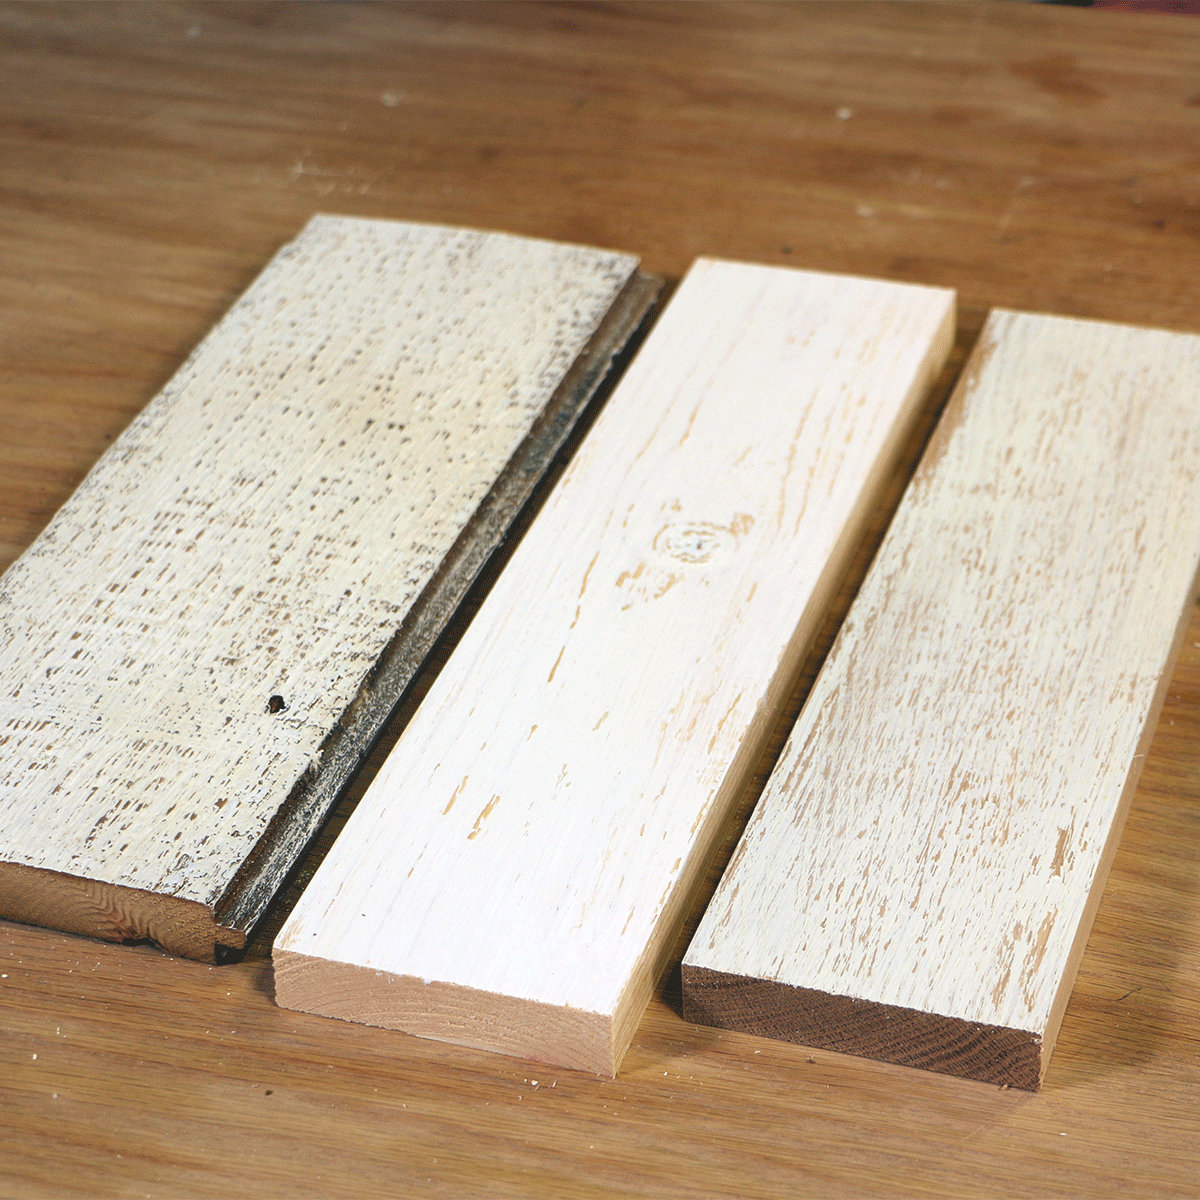 How to Whitewash Wood: 3 Simple Techniques